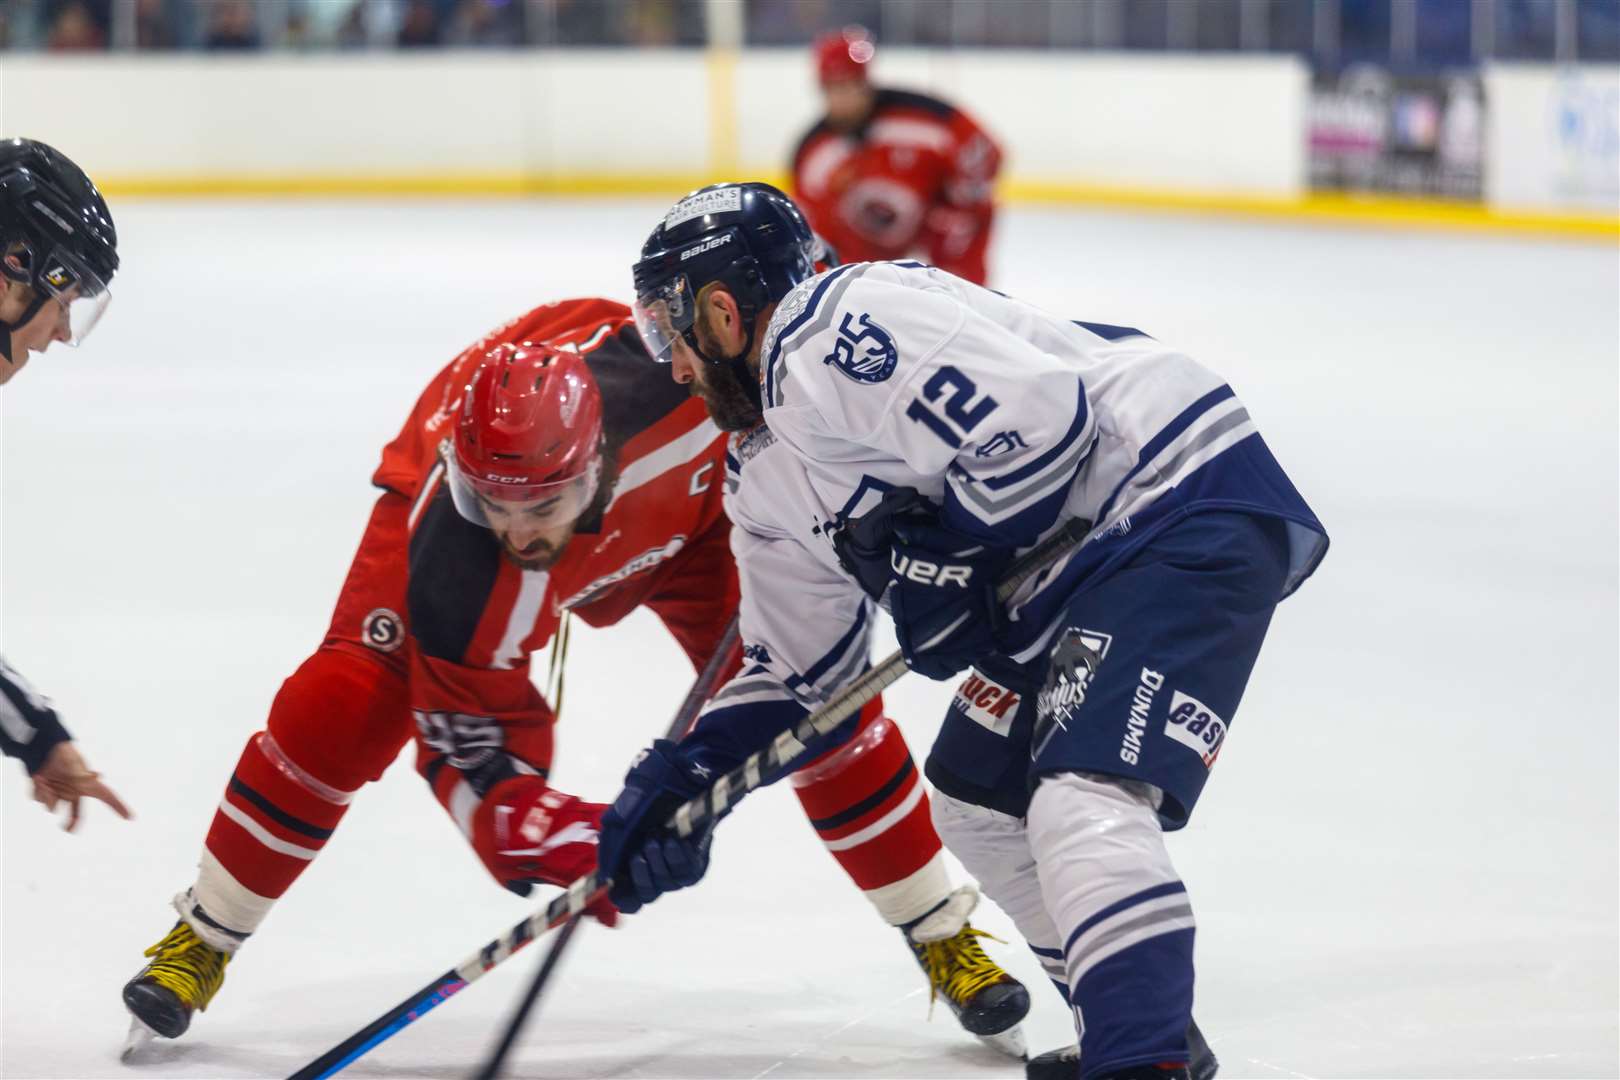 Coach Karl Lennon playing for Invicta Dynamos after selection issues Picture: David Trevallion